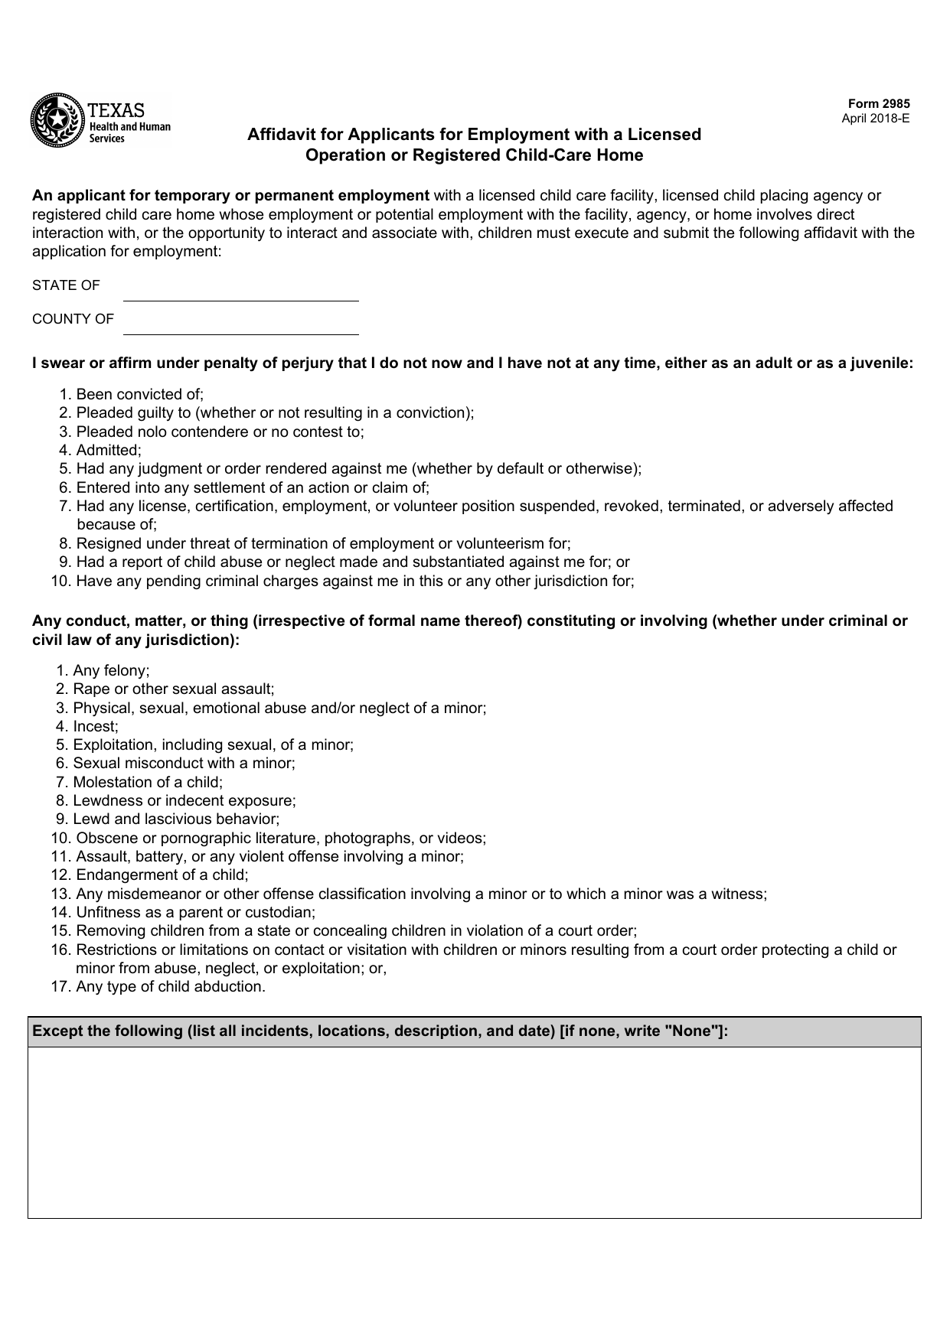 Form 2985 Affidavit for Applicants for Employment With a Licensed Operation or Registered Child-Care Home - Texas, Page 1